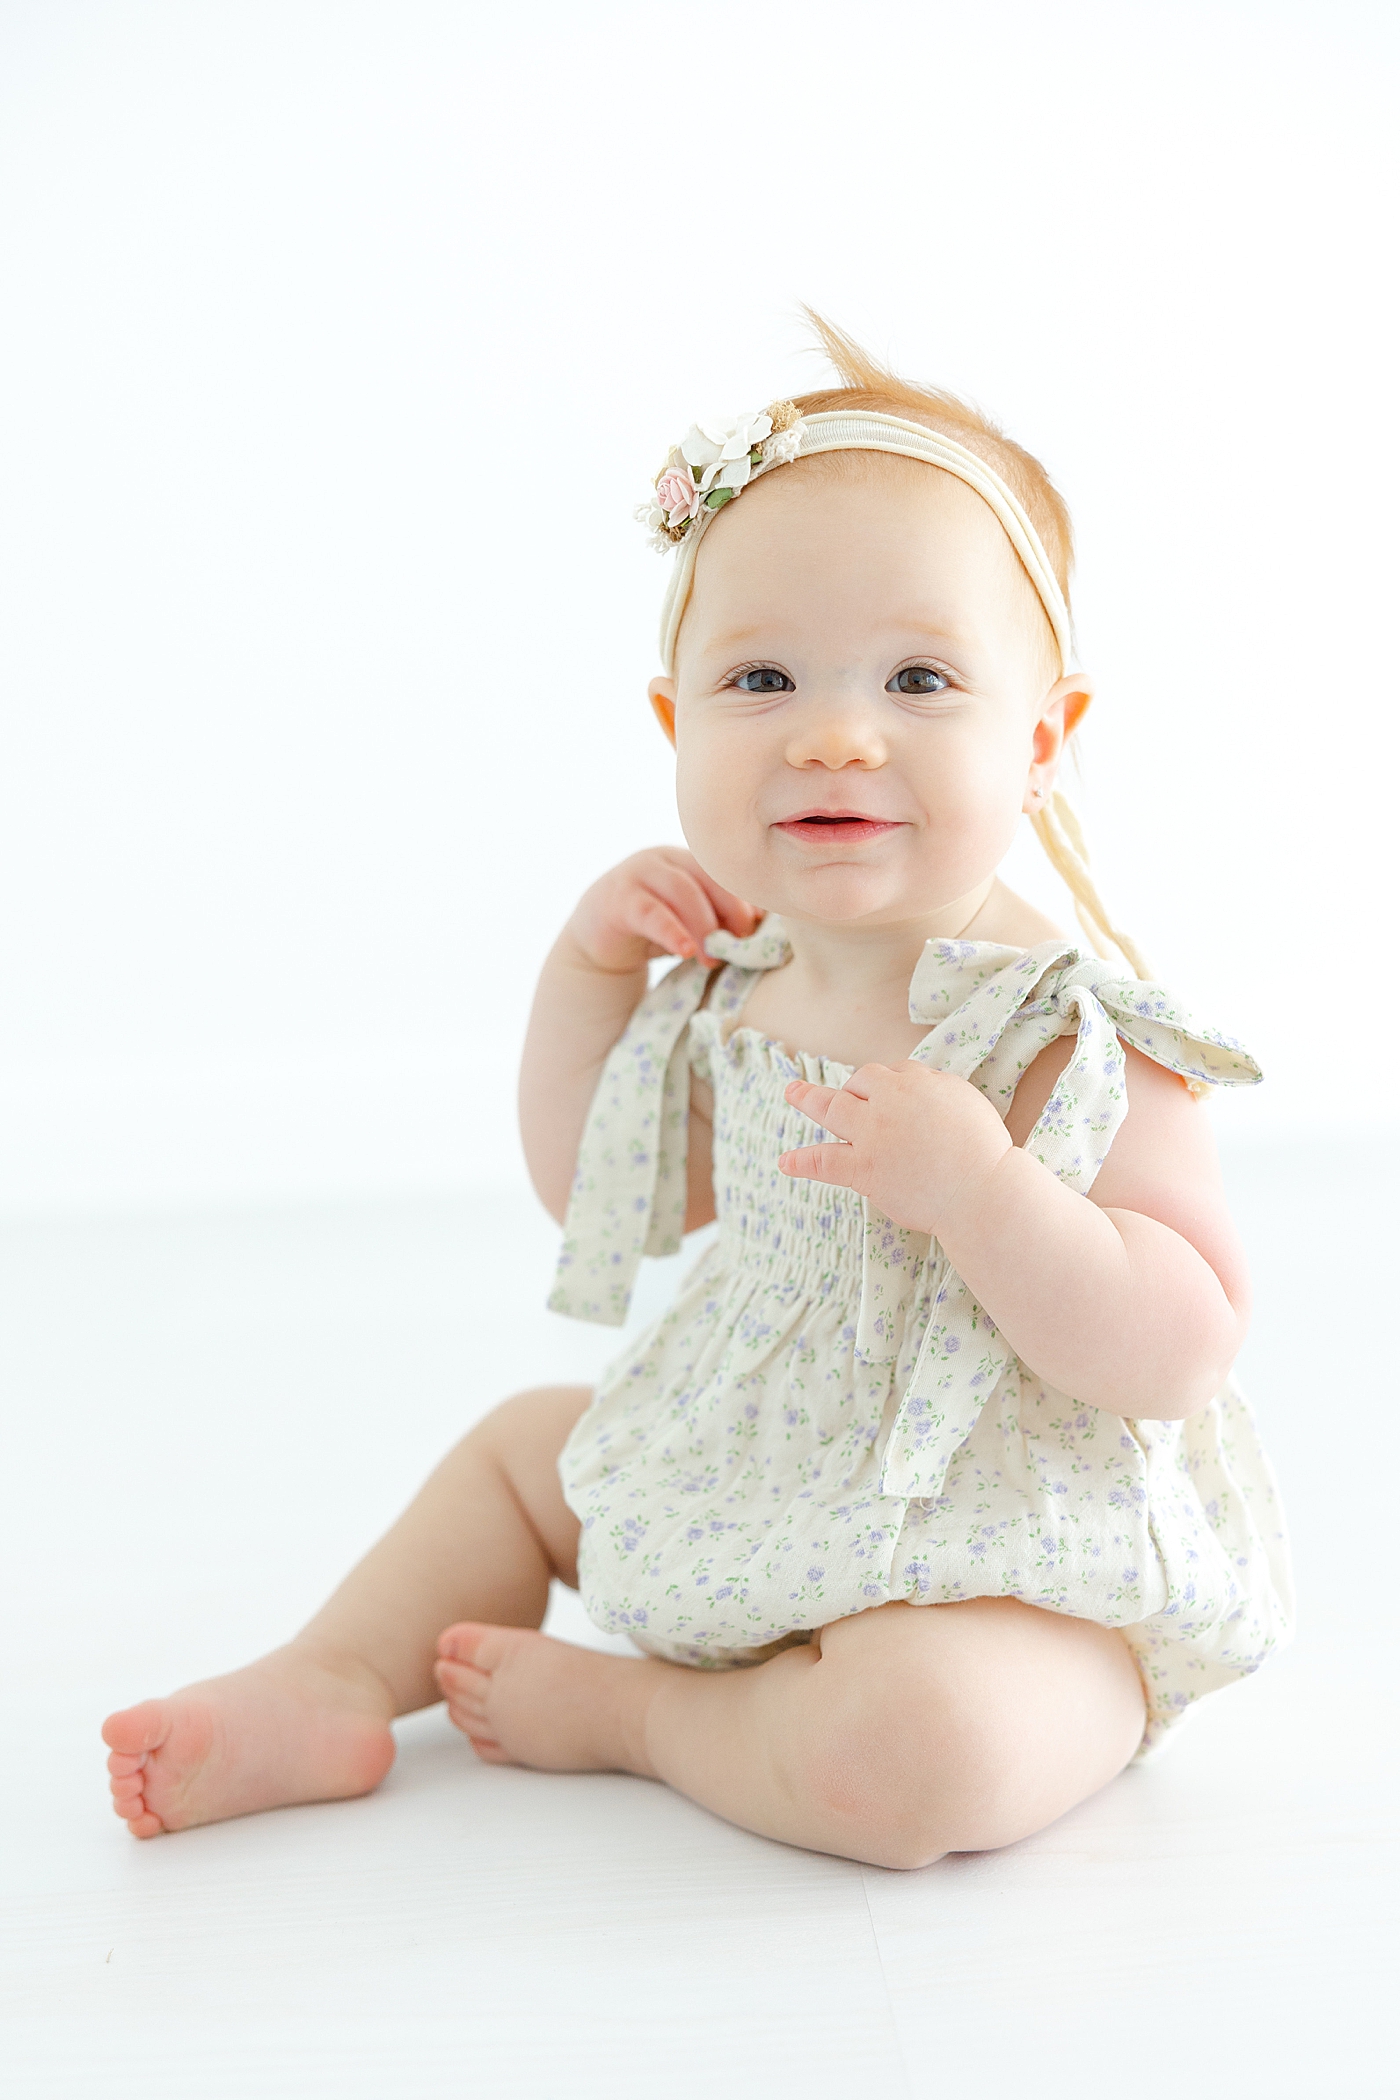 Baby girl in a floral jumpsuit | Image by Sana Ahmed Photography